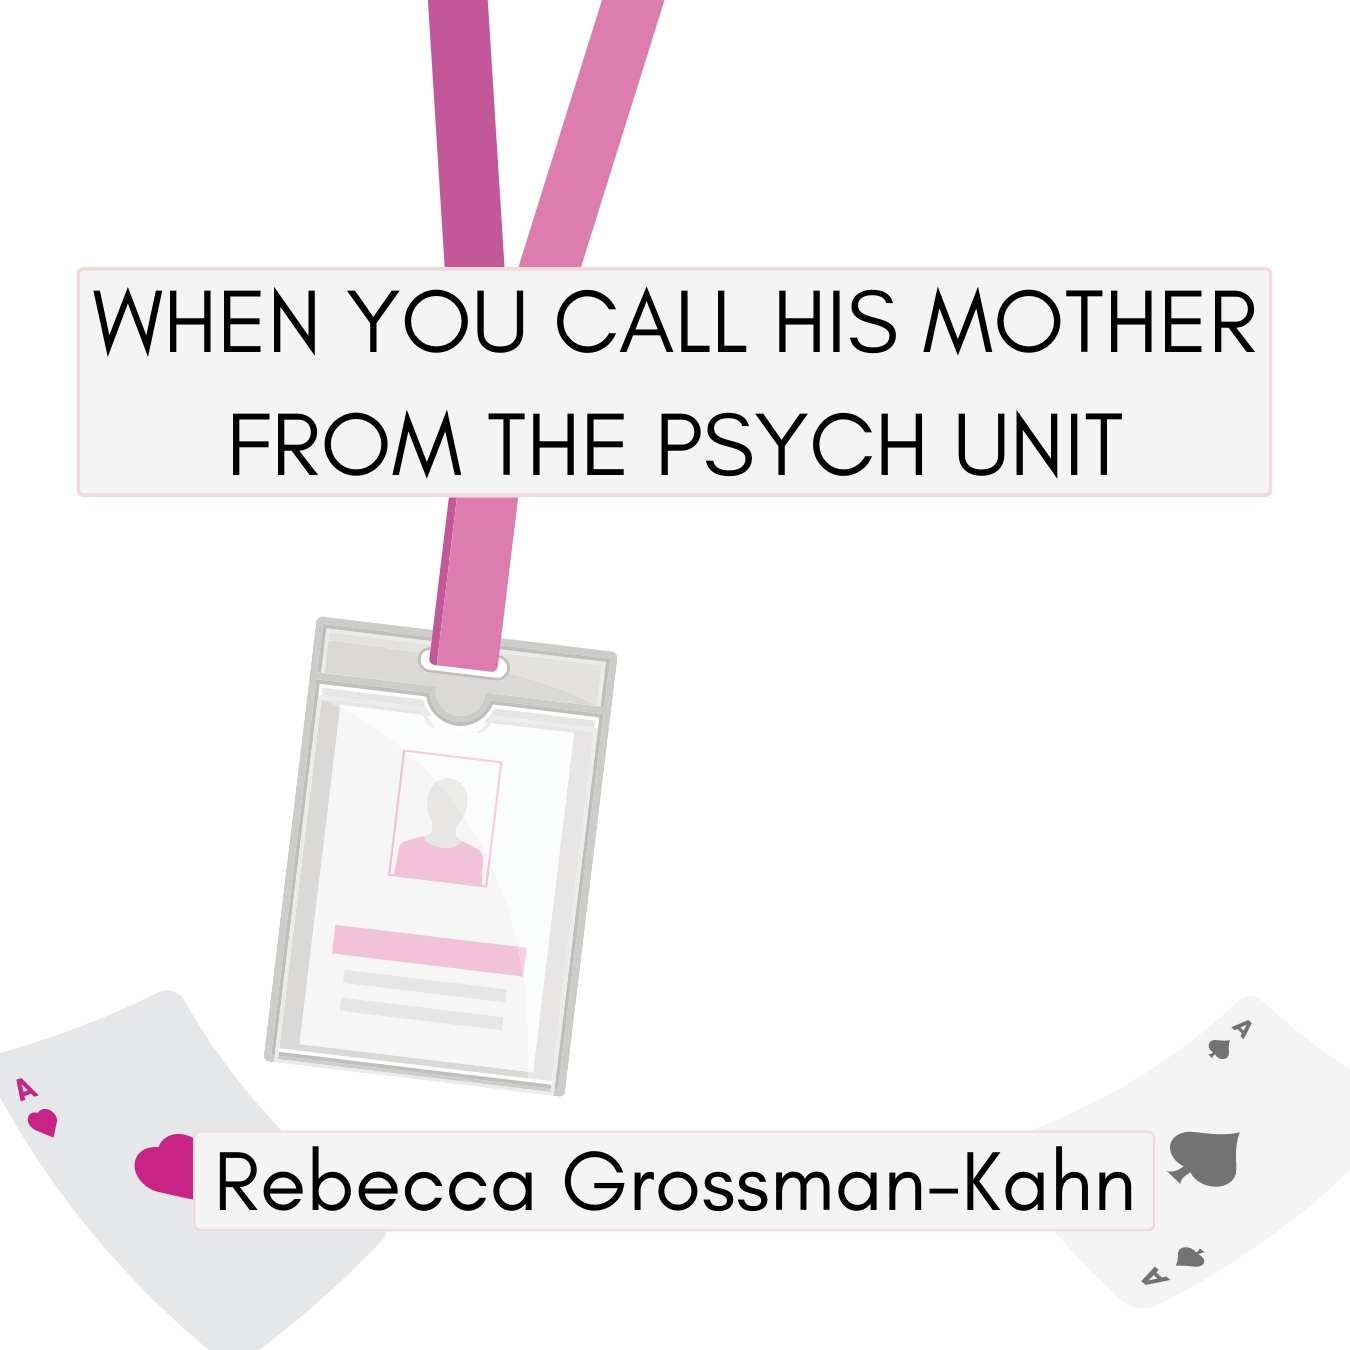 WHEN YOU CALL HIS MOTHER FROM THE PSYCH UNIT by Rebecca Grossman-Kahn